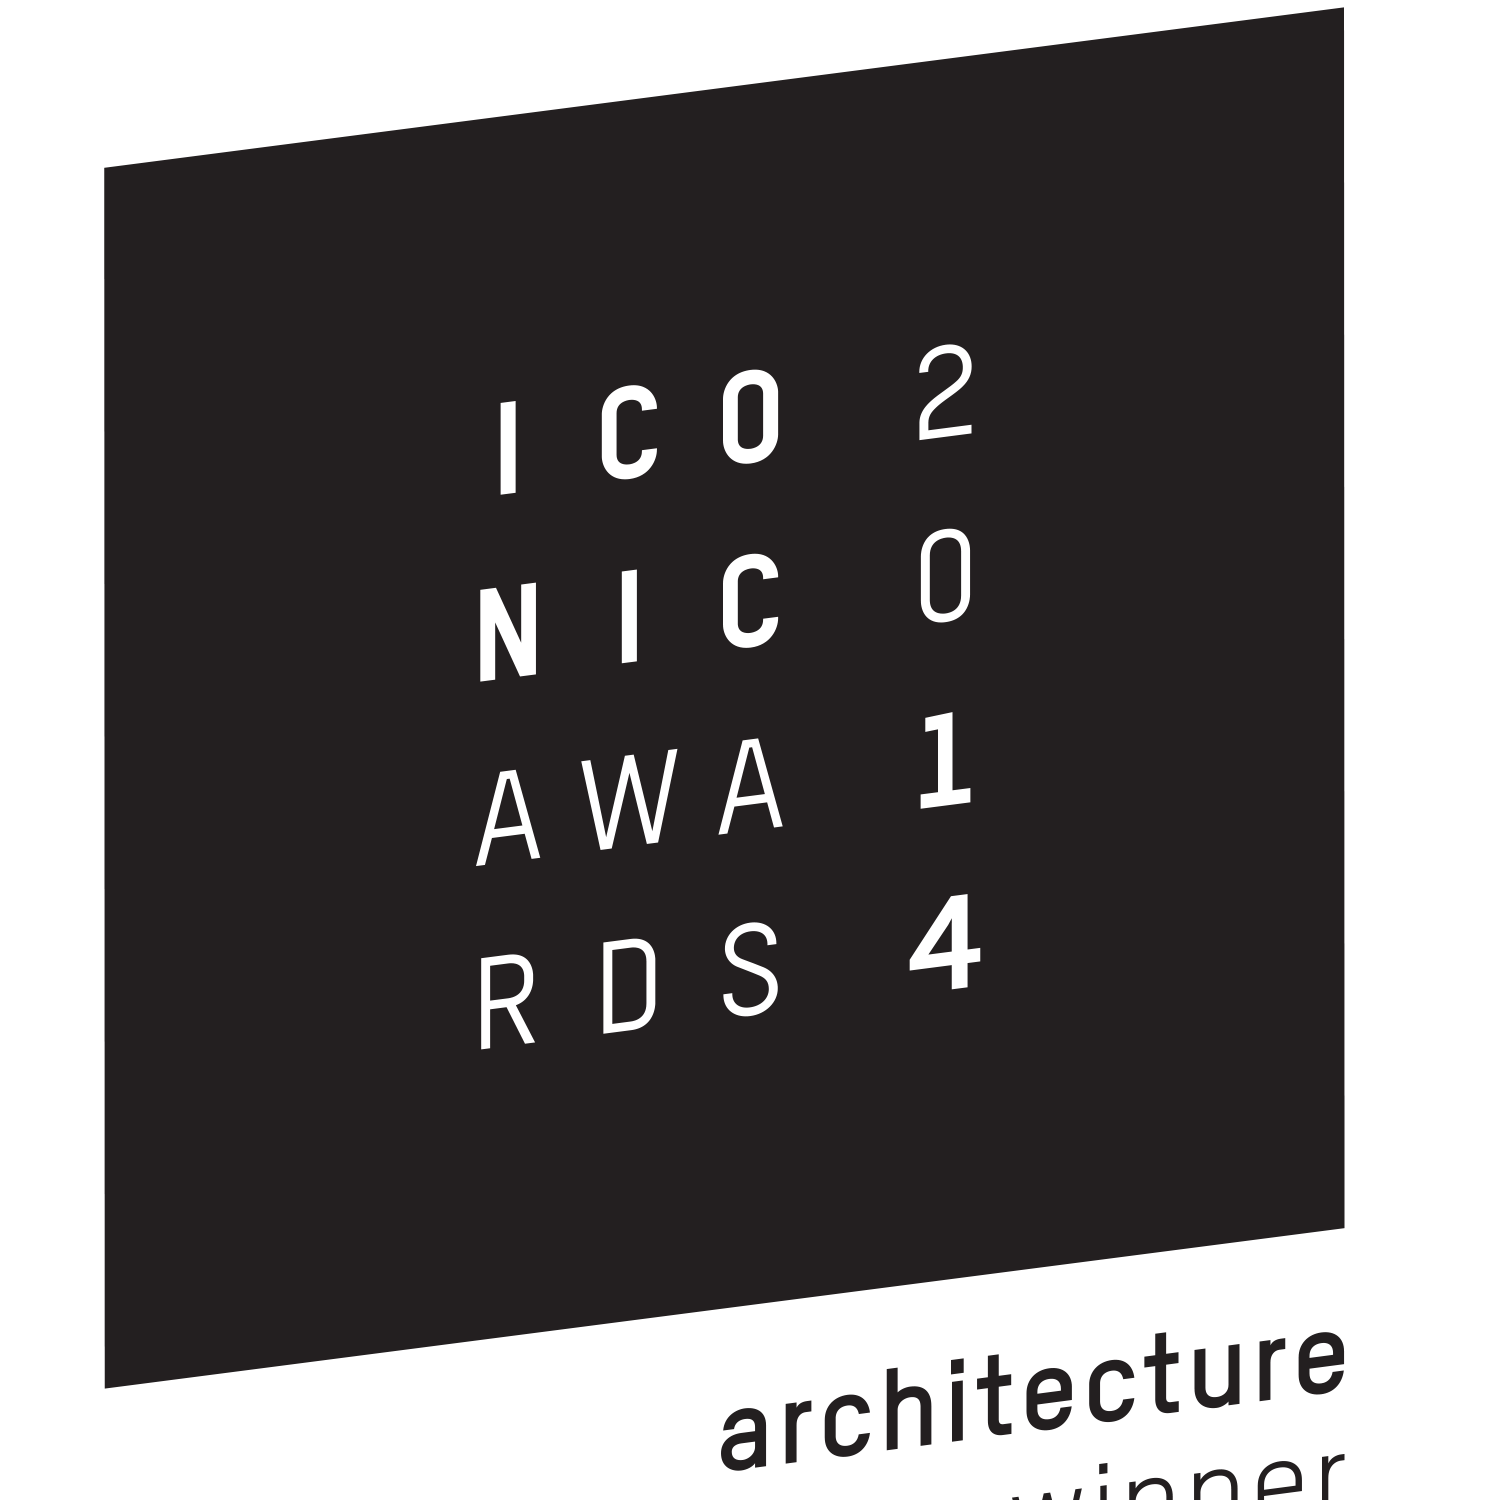 Iconic Awards_ARCHITECTURE_Winner.png